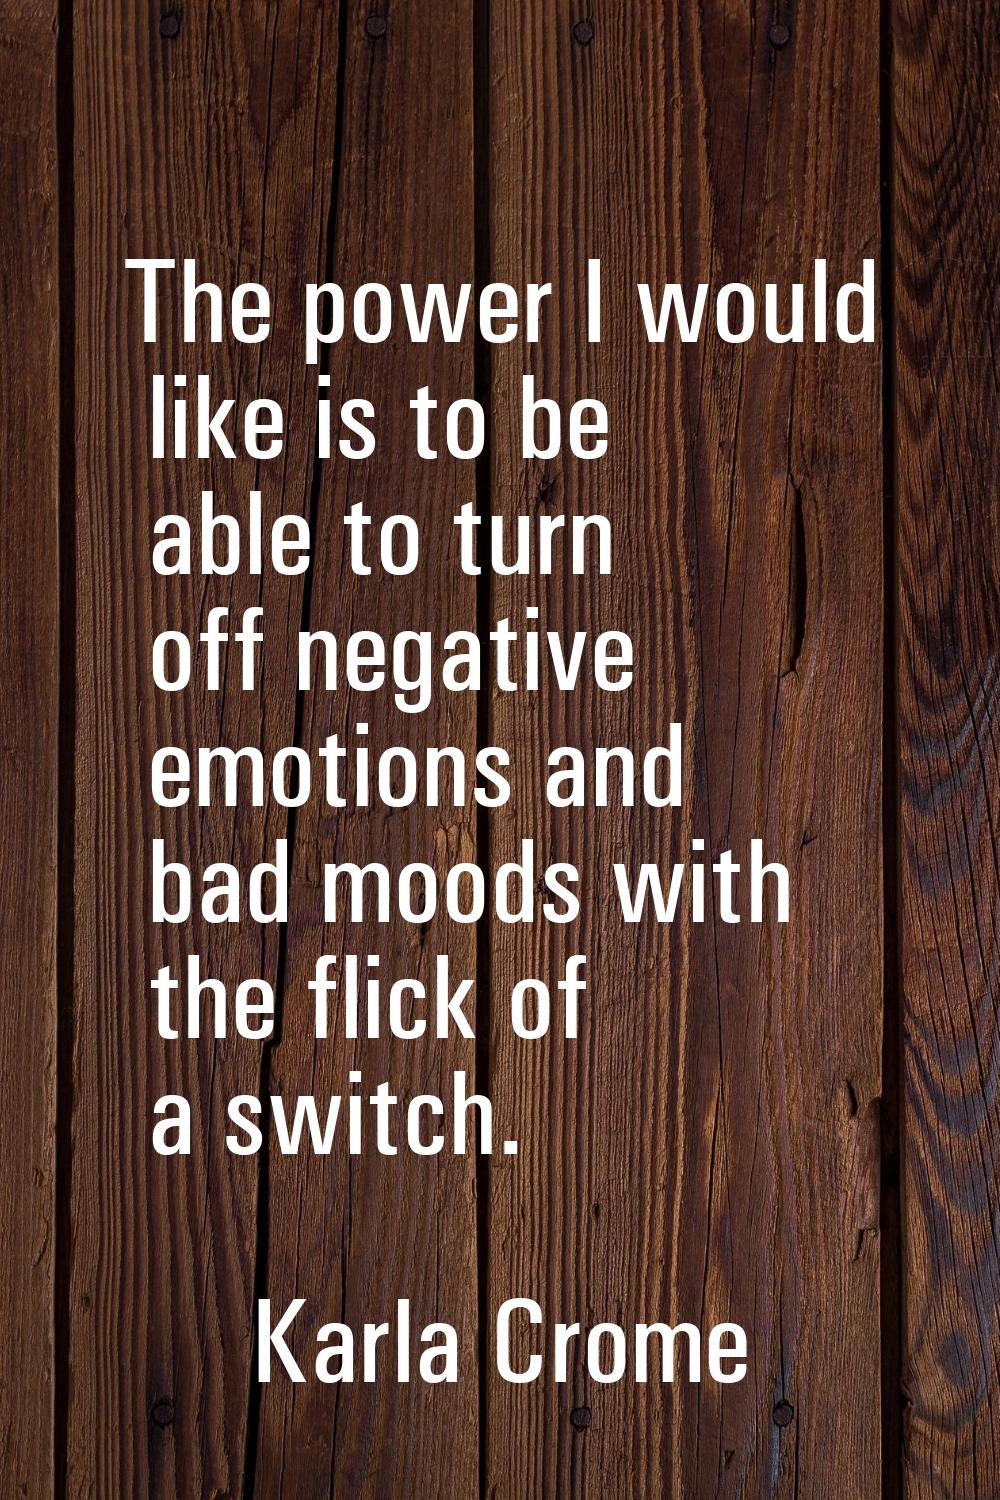 The power I would like is to be able to turn off negative emotions and bad moods with the flick of 